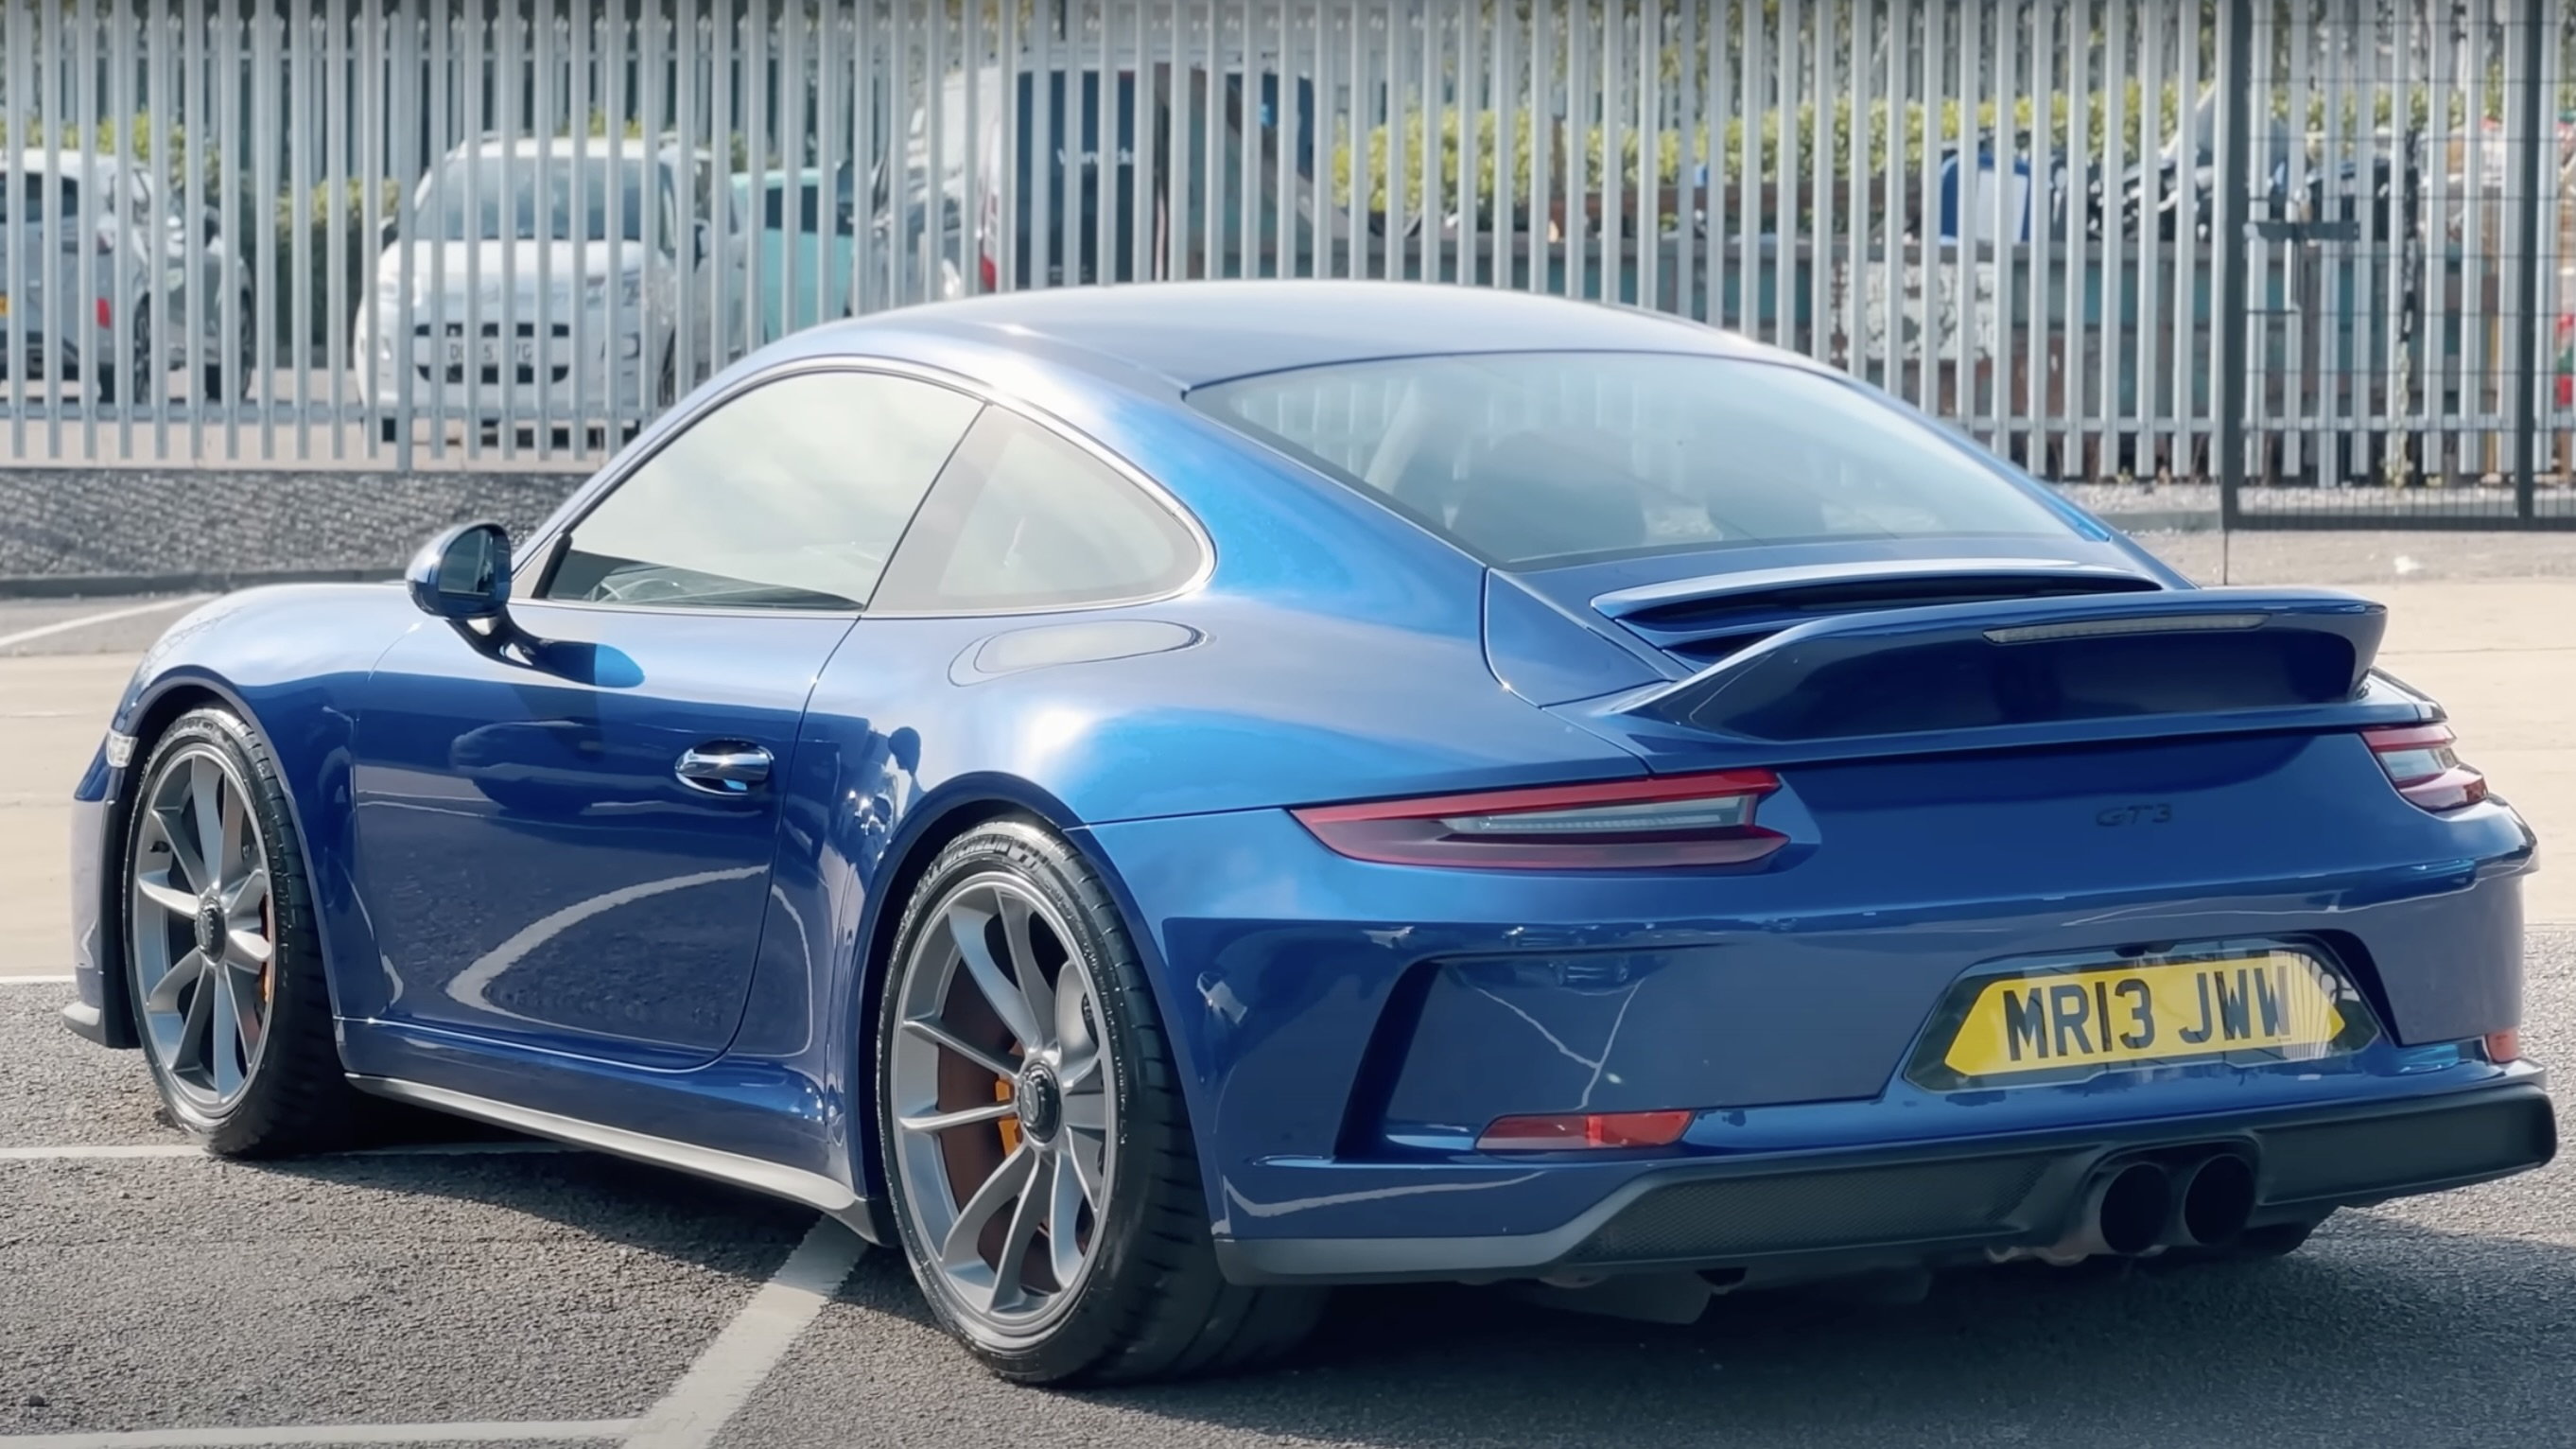 This 911 GT3 Has Paint That Peels Right Off Like a Vinyl Wrap